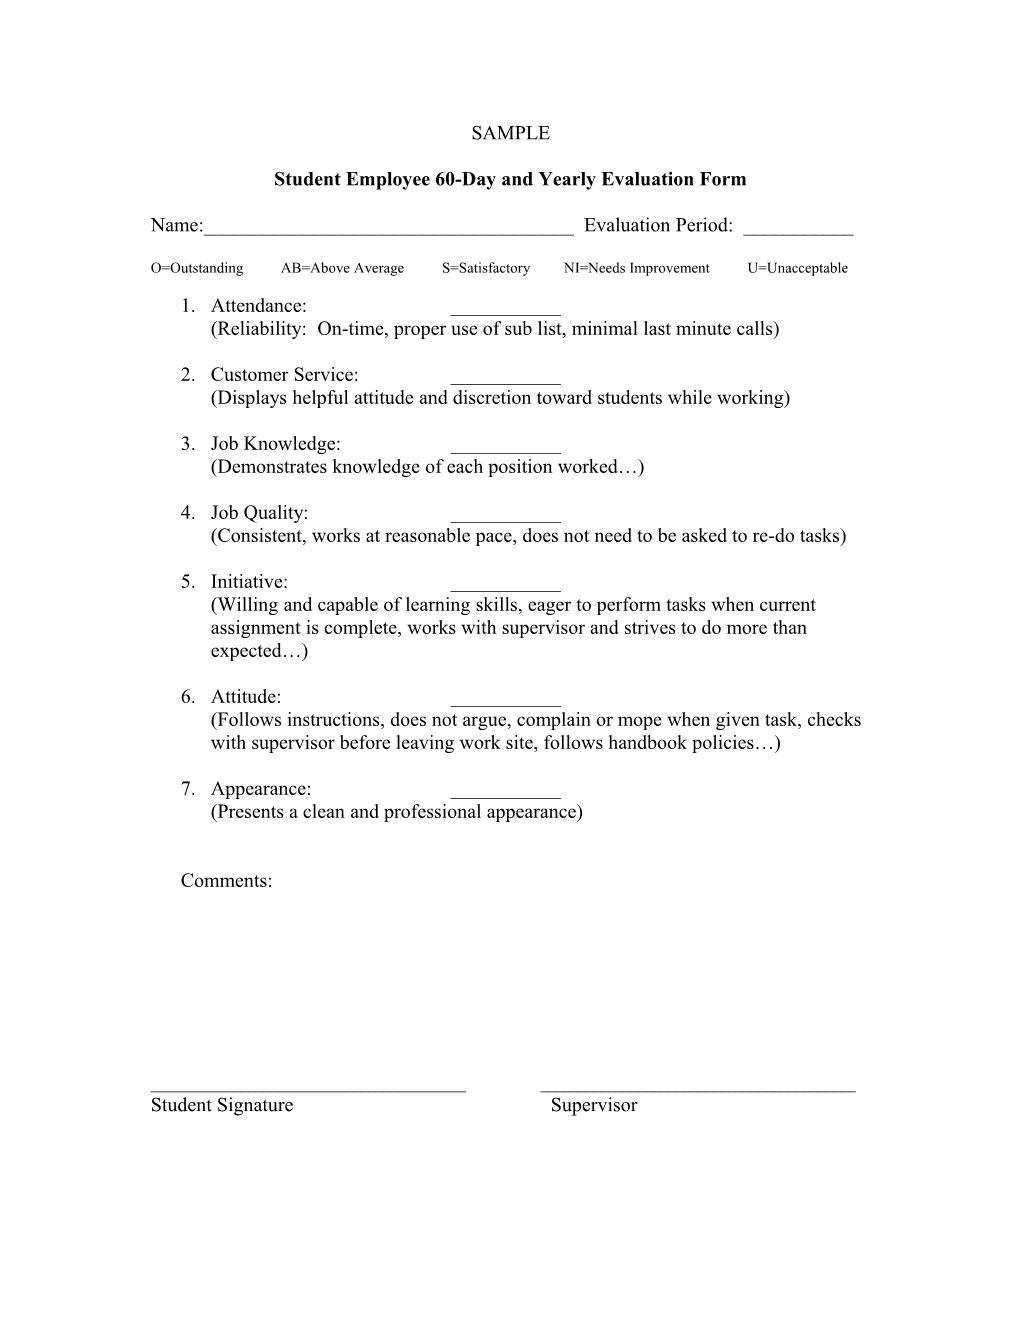 Student Employee 60-Day and Yearly Evaluation Form